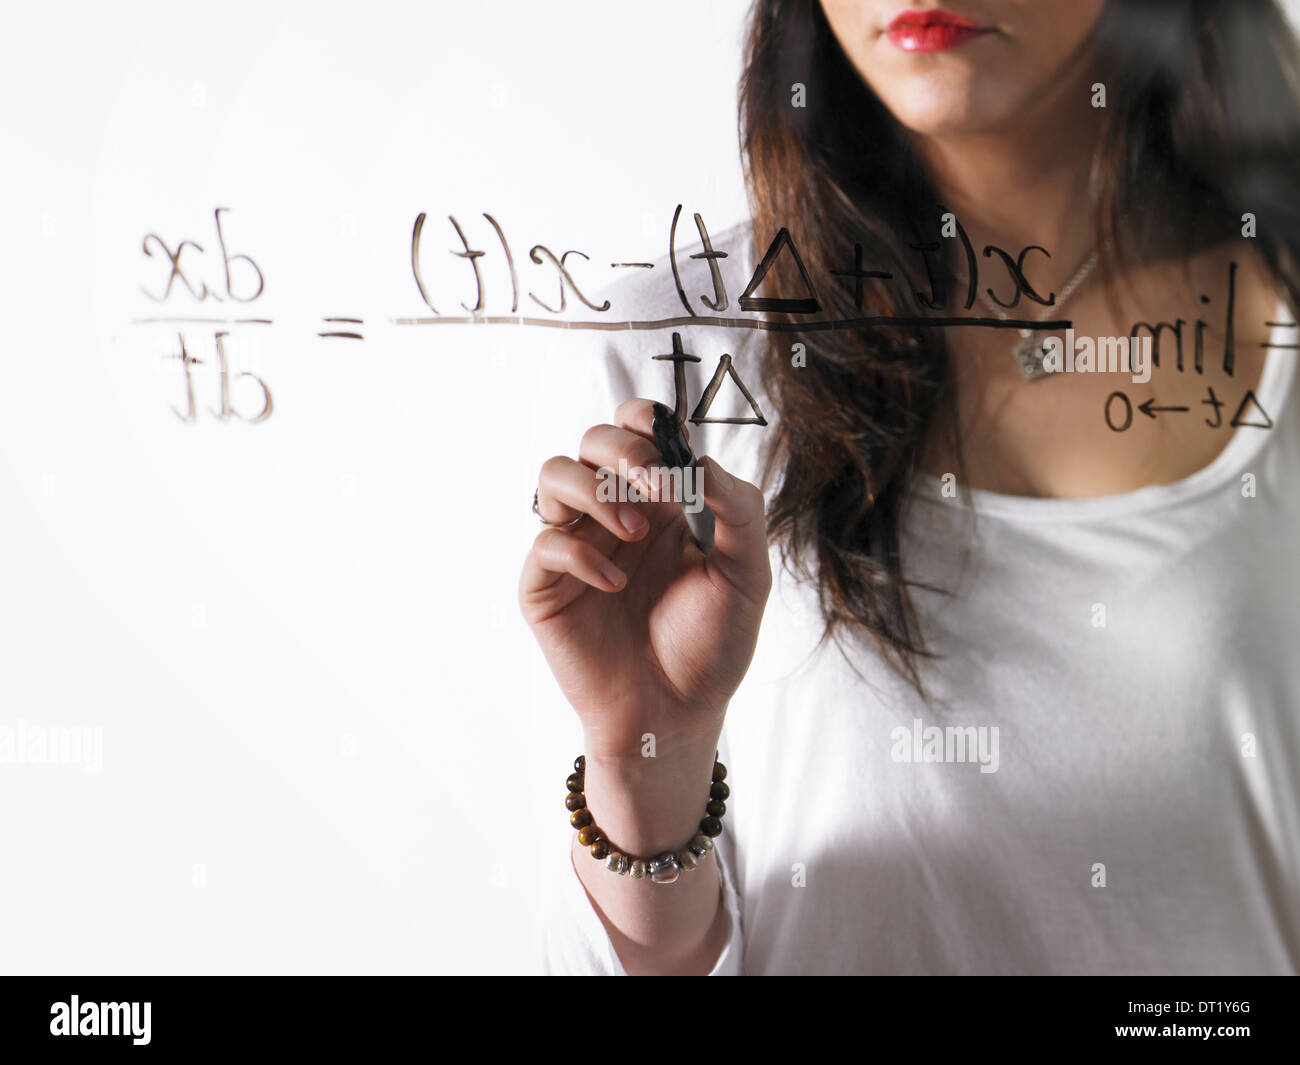 A young woman writing a mathematical equation with black marker on a clear see-through surface Stock Photo